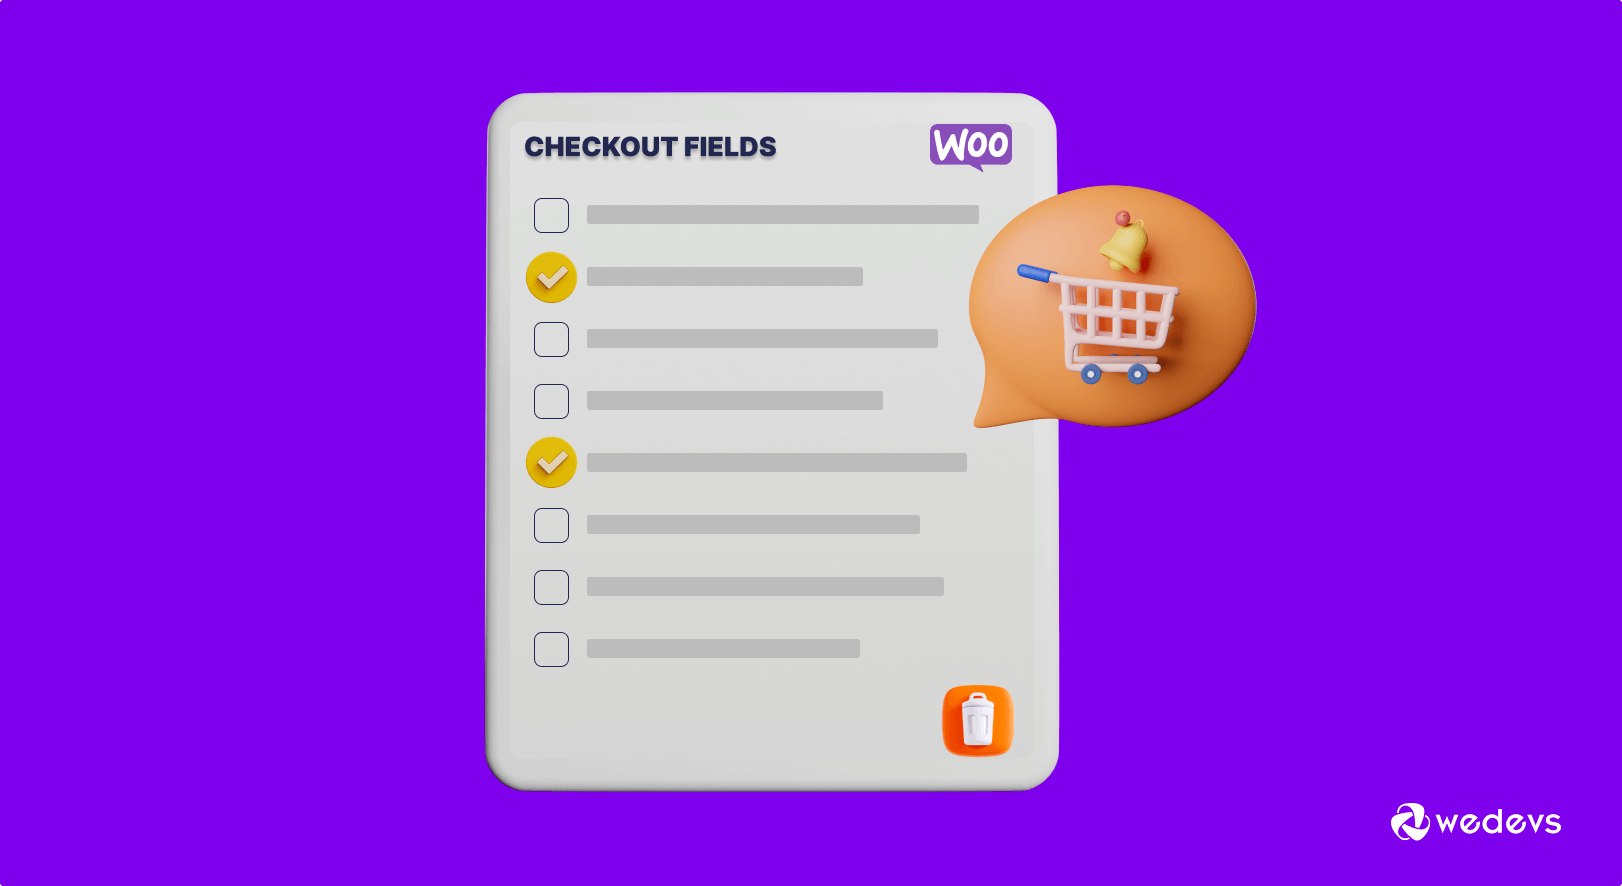 3 Easy Ways to Customize Your Checkout Fields on WooCommerce - weDevs